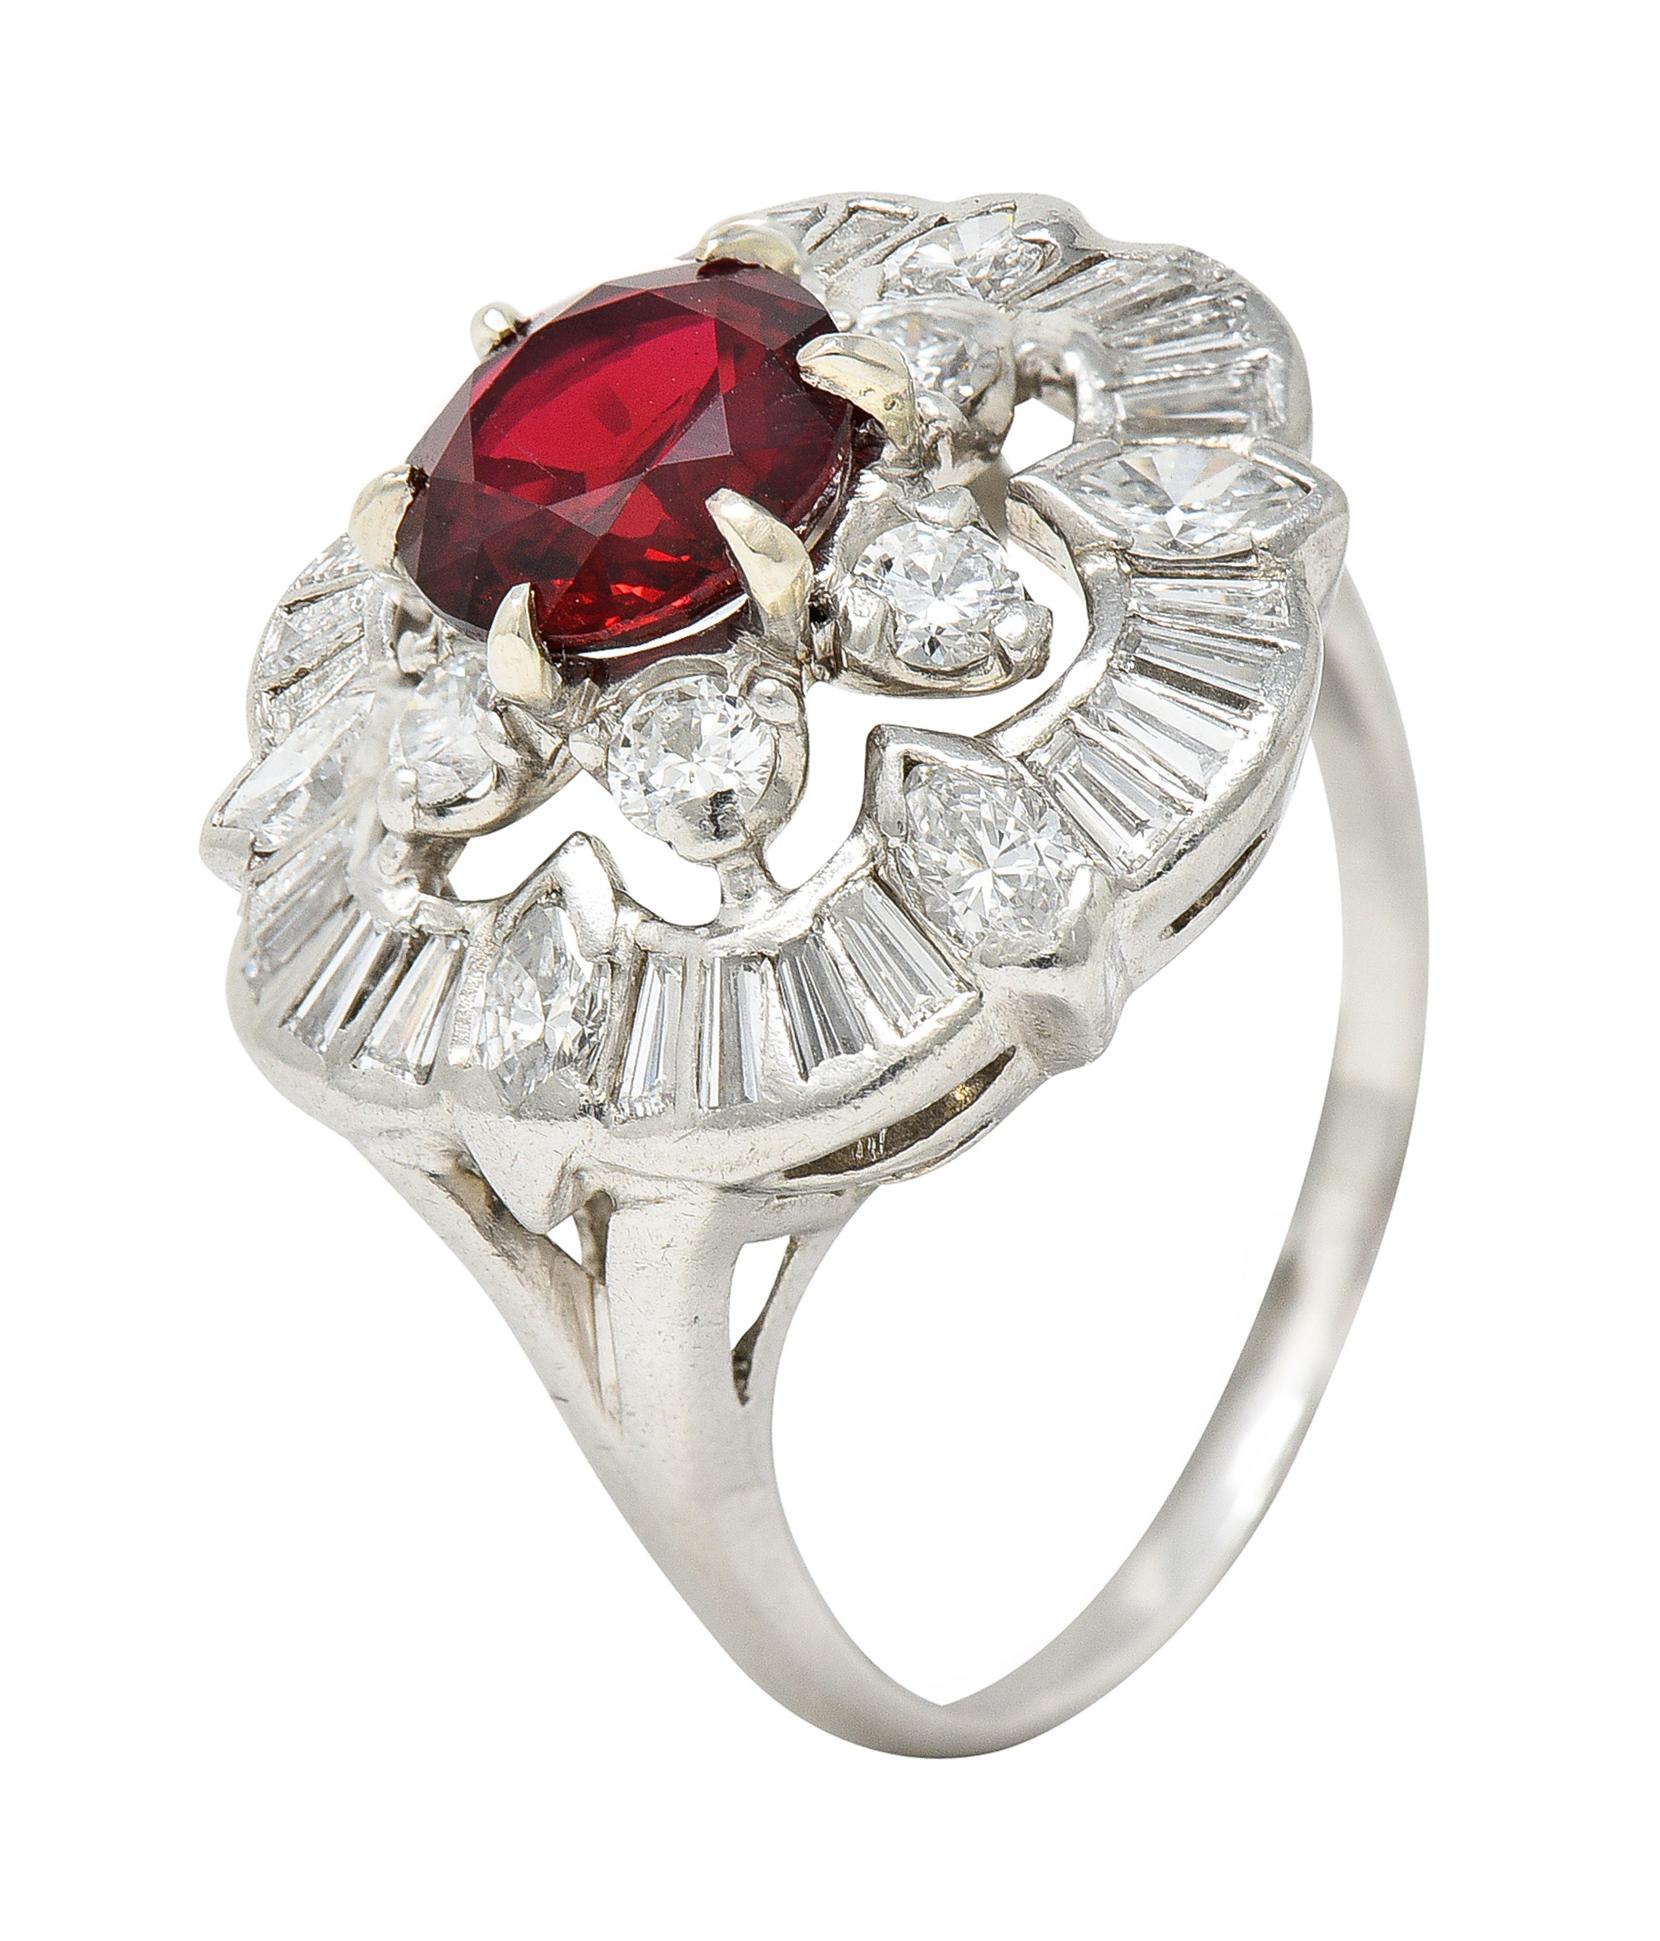 1950's Mid-Century 2.77 Carats Red Spinel Diamond Platinum Cluster Cocktail Ring For Sale 5